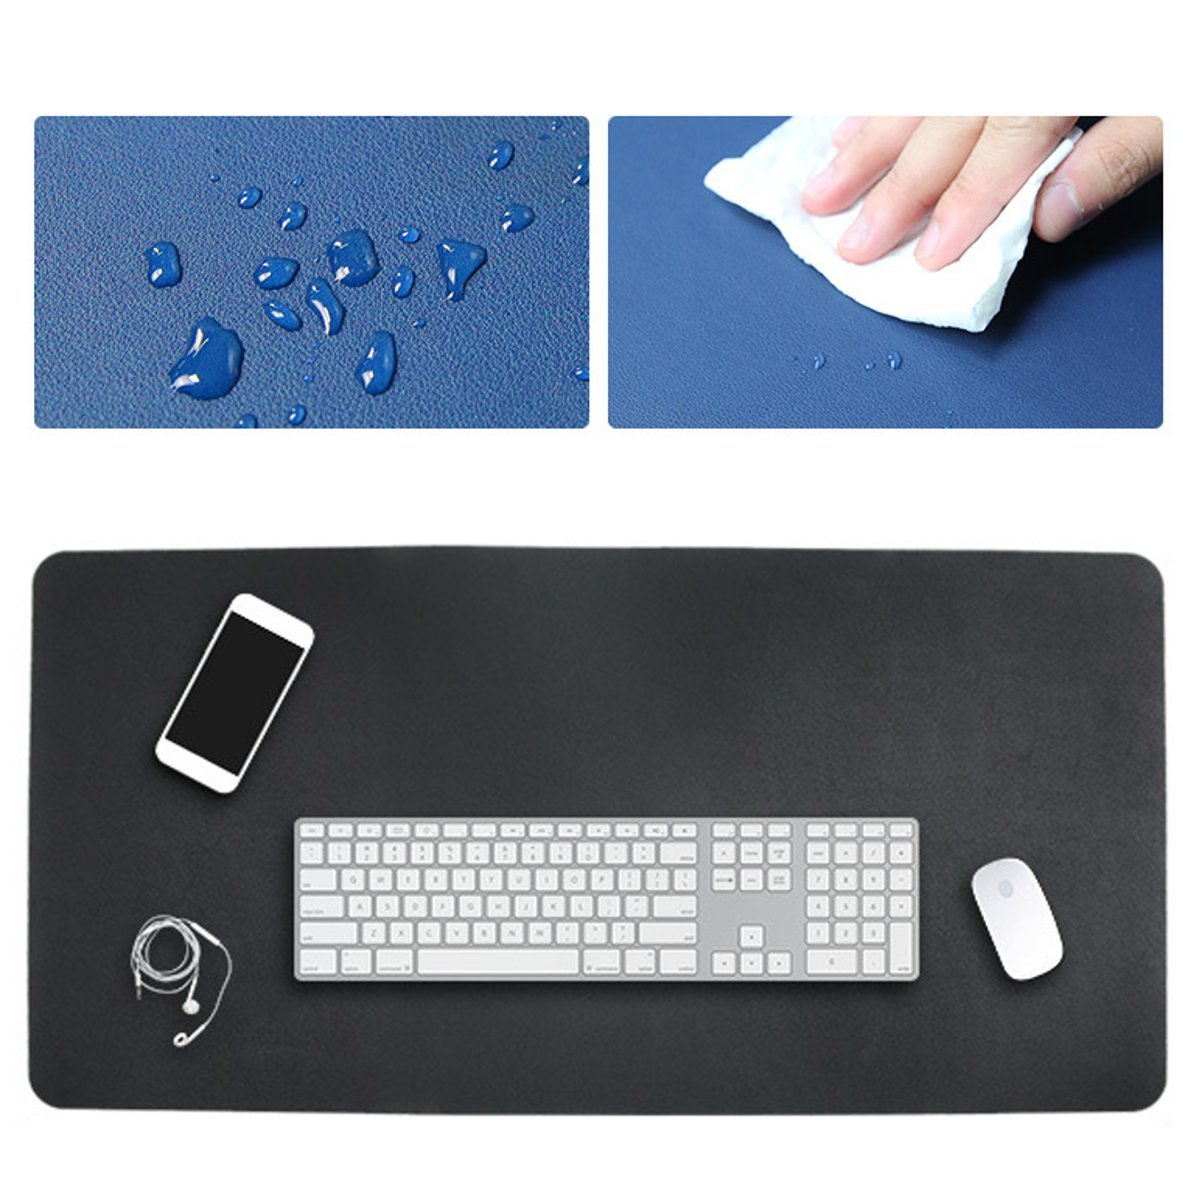 80x40cm Both Sides Two Colors Extended PU leather Mouse Pad Mat Large Office Gaming Desk Mat 2